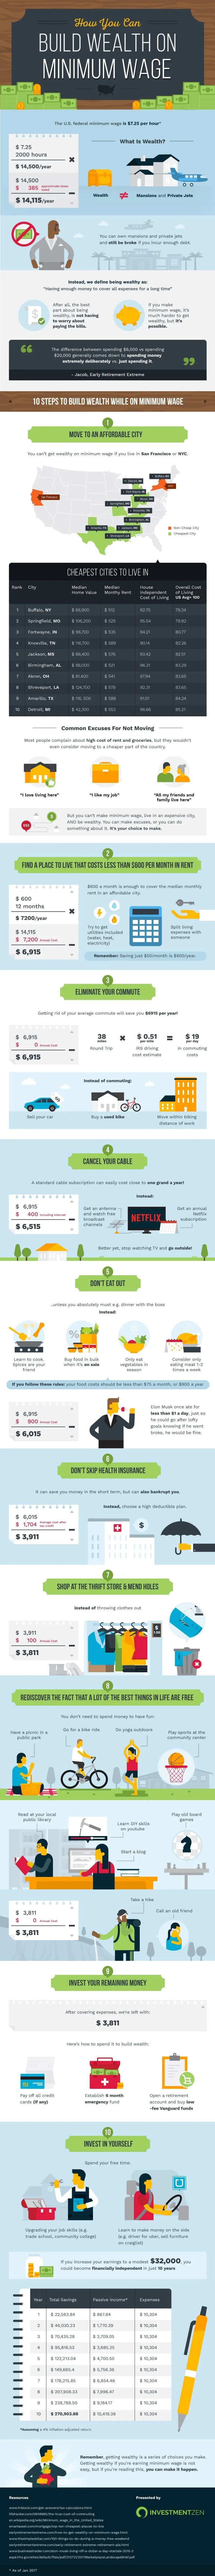 How You Can Build Wealth on Minimum Wage - #infographic